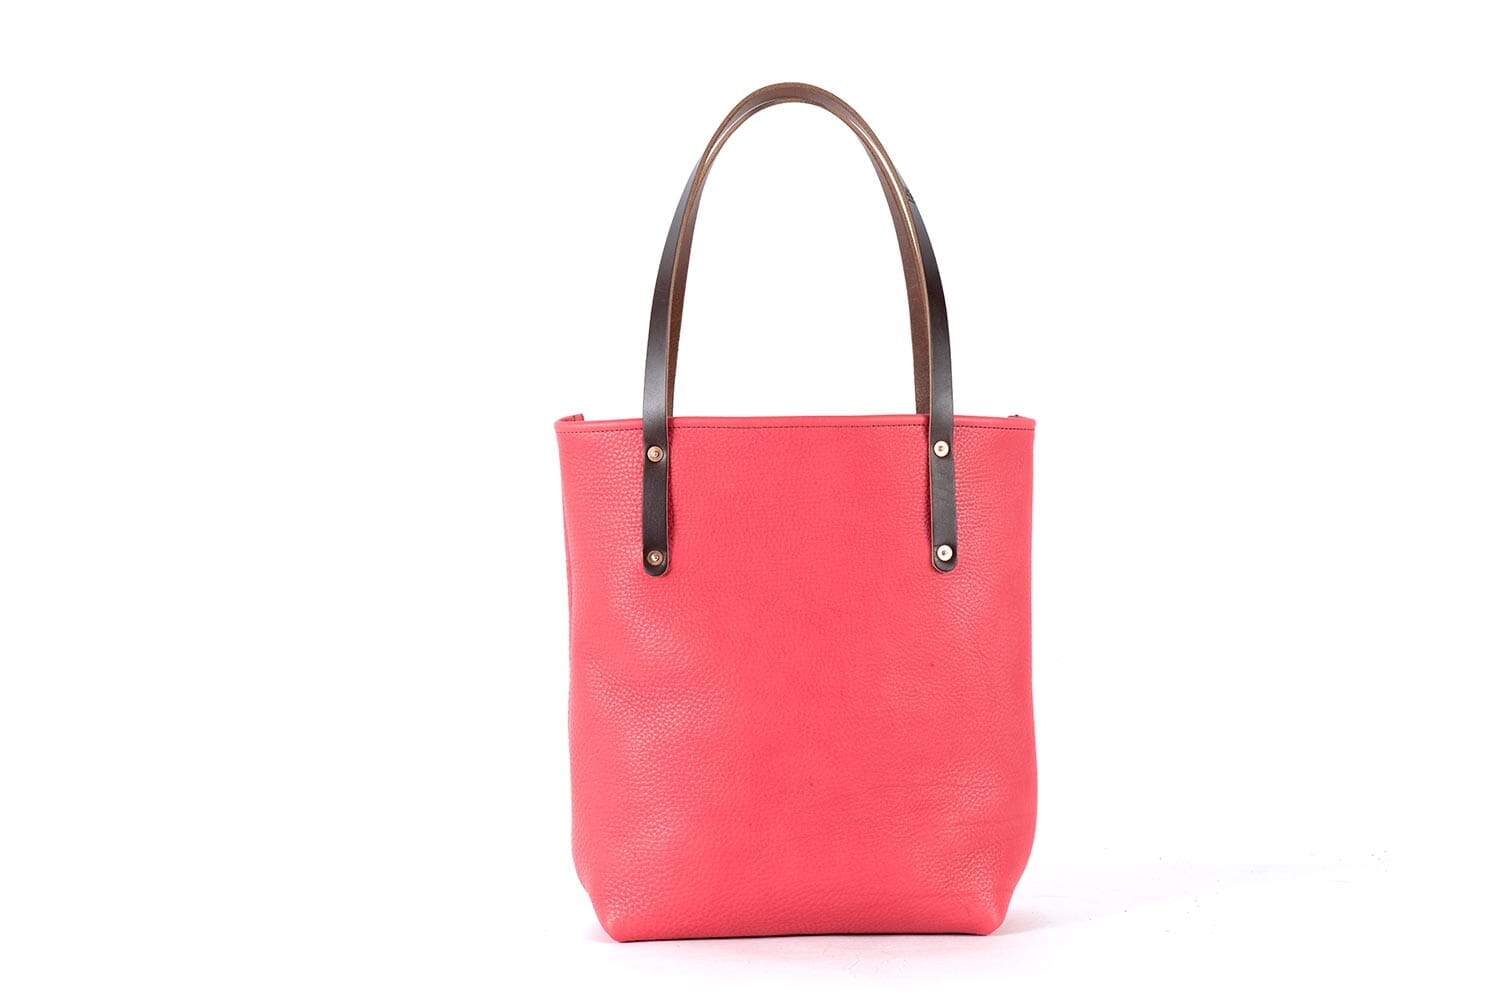 AVERY LEATHER TOTE BAG - SLIM LARGE - PINK (READY TO SHIP)